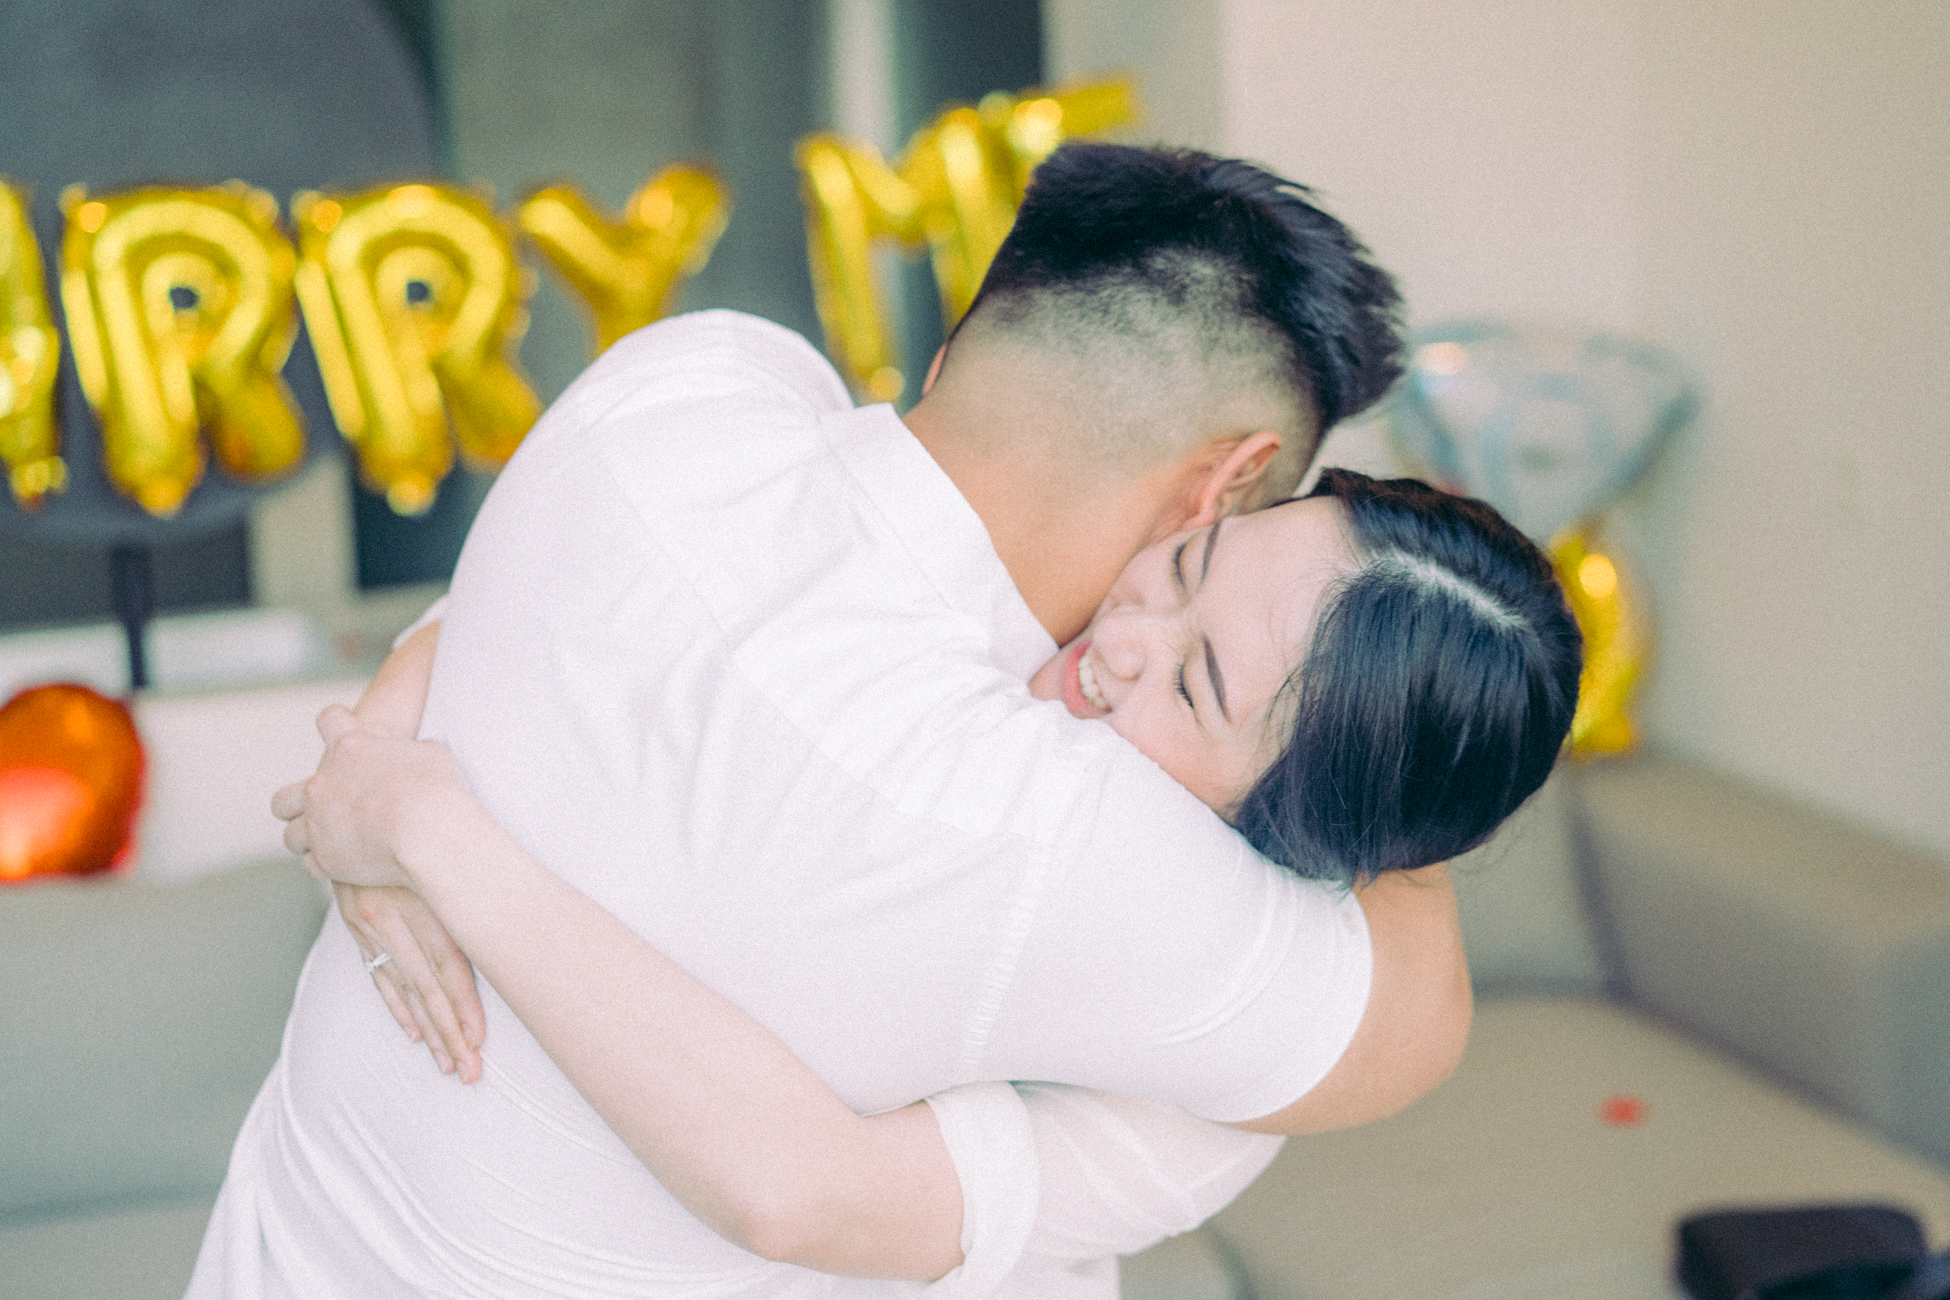 The couple hug each other in engagement proposal photography session